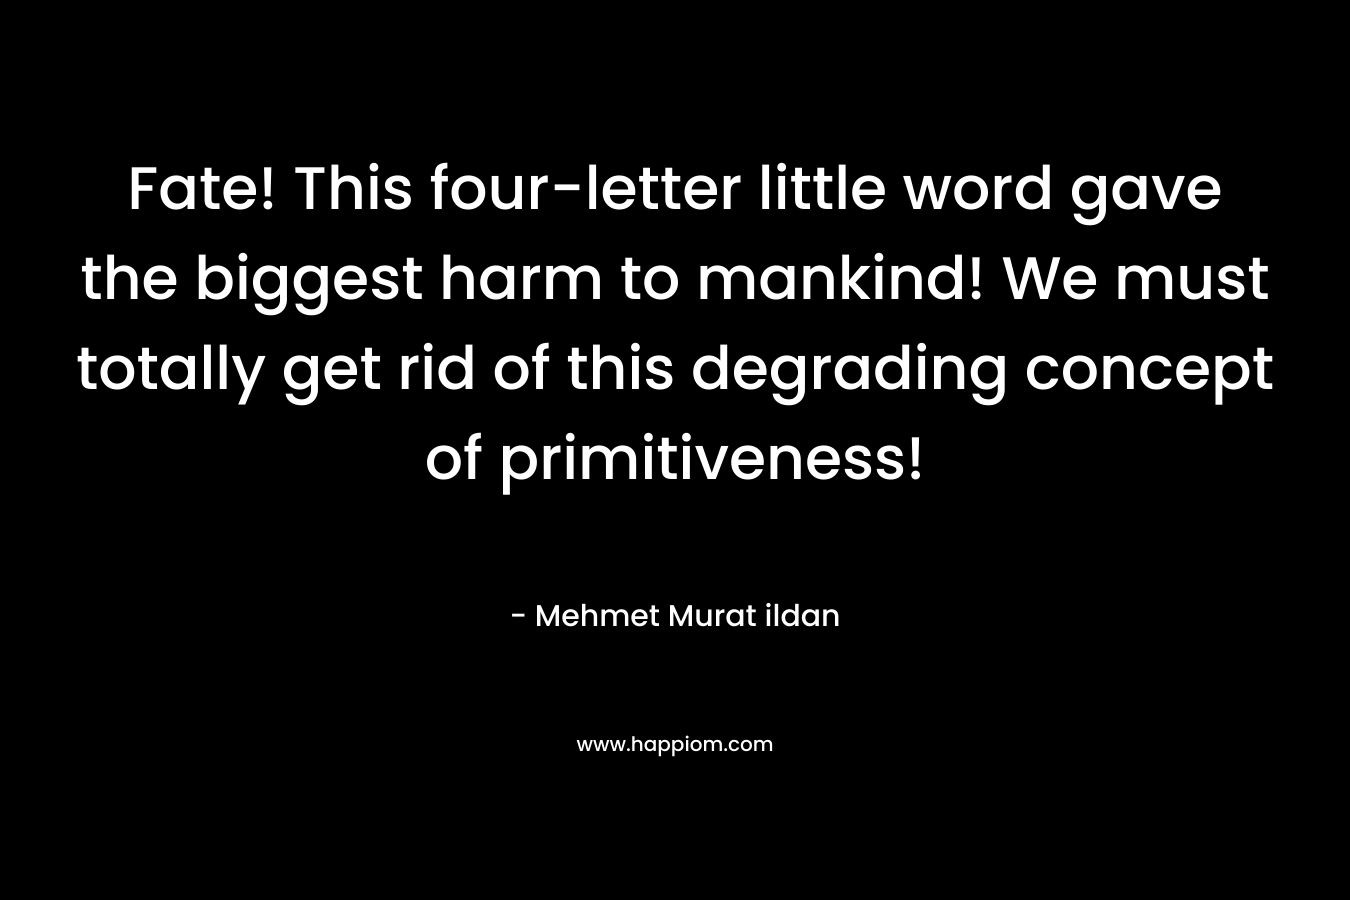 Fate! This four-letter little word gave the biggest harm to mankind! We must totally get rid of this degrading concept of primitiveness! – Mehmet Murat ildan